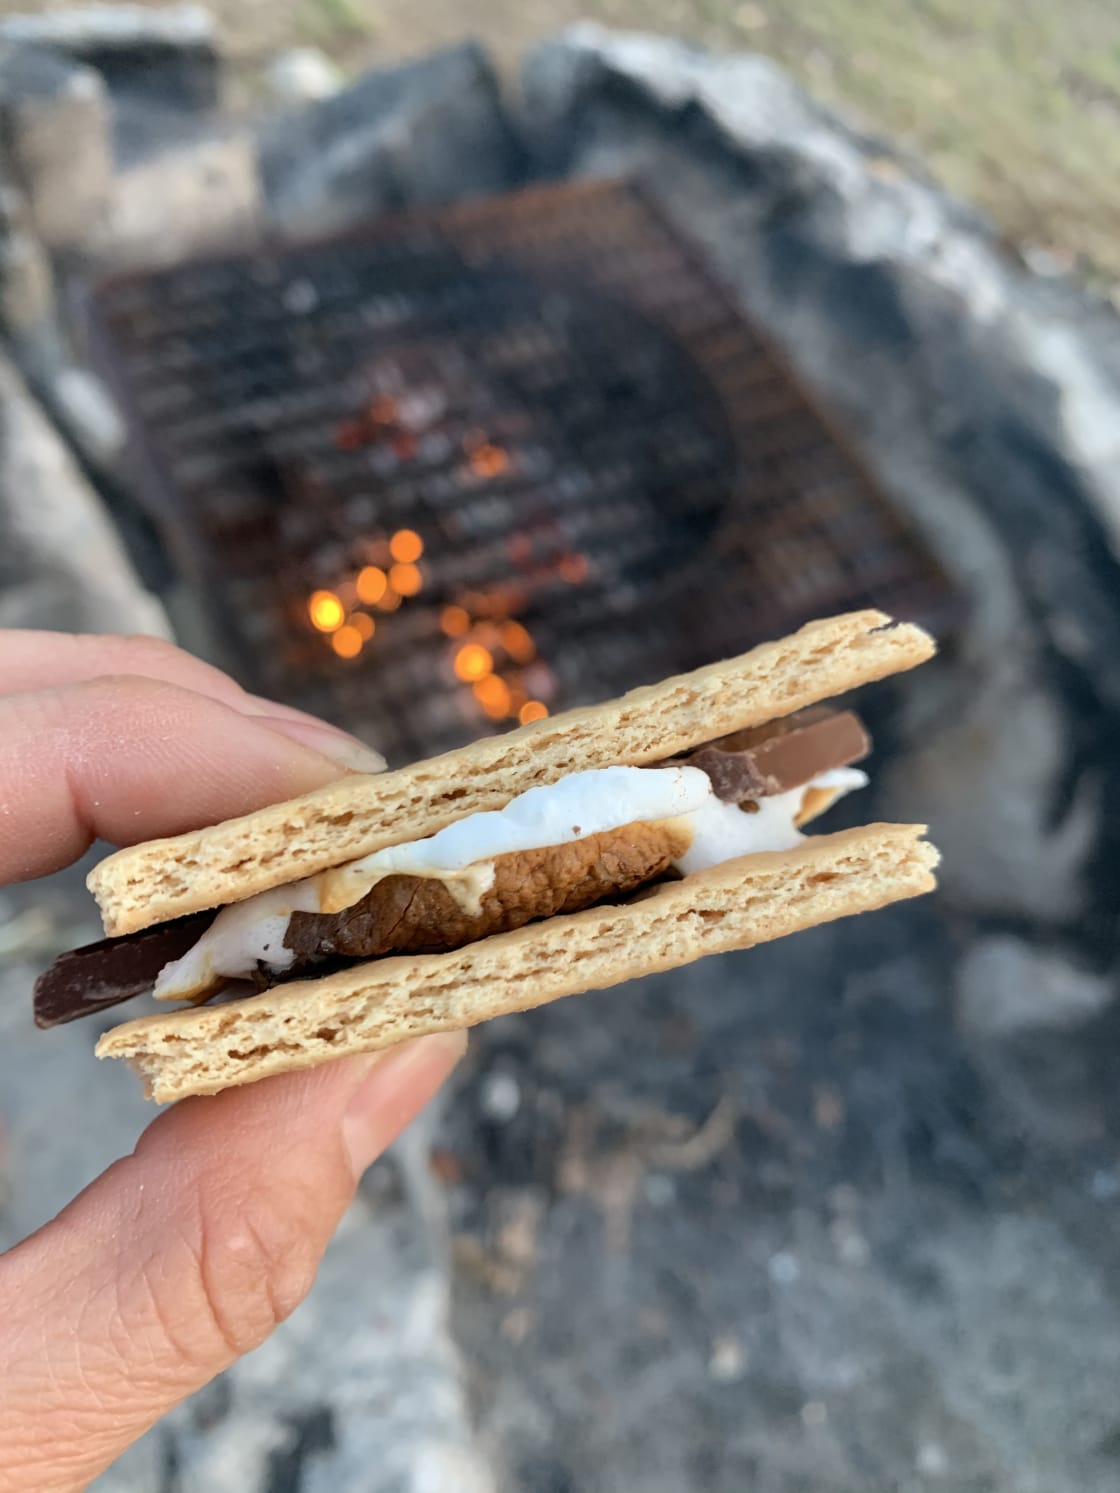 The most perfect s’more I ever toasted on my epic rock fire pit. 